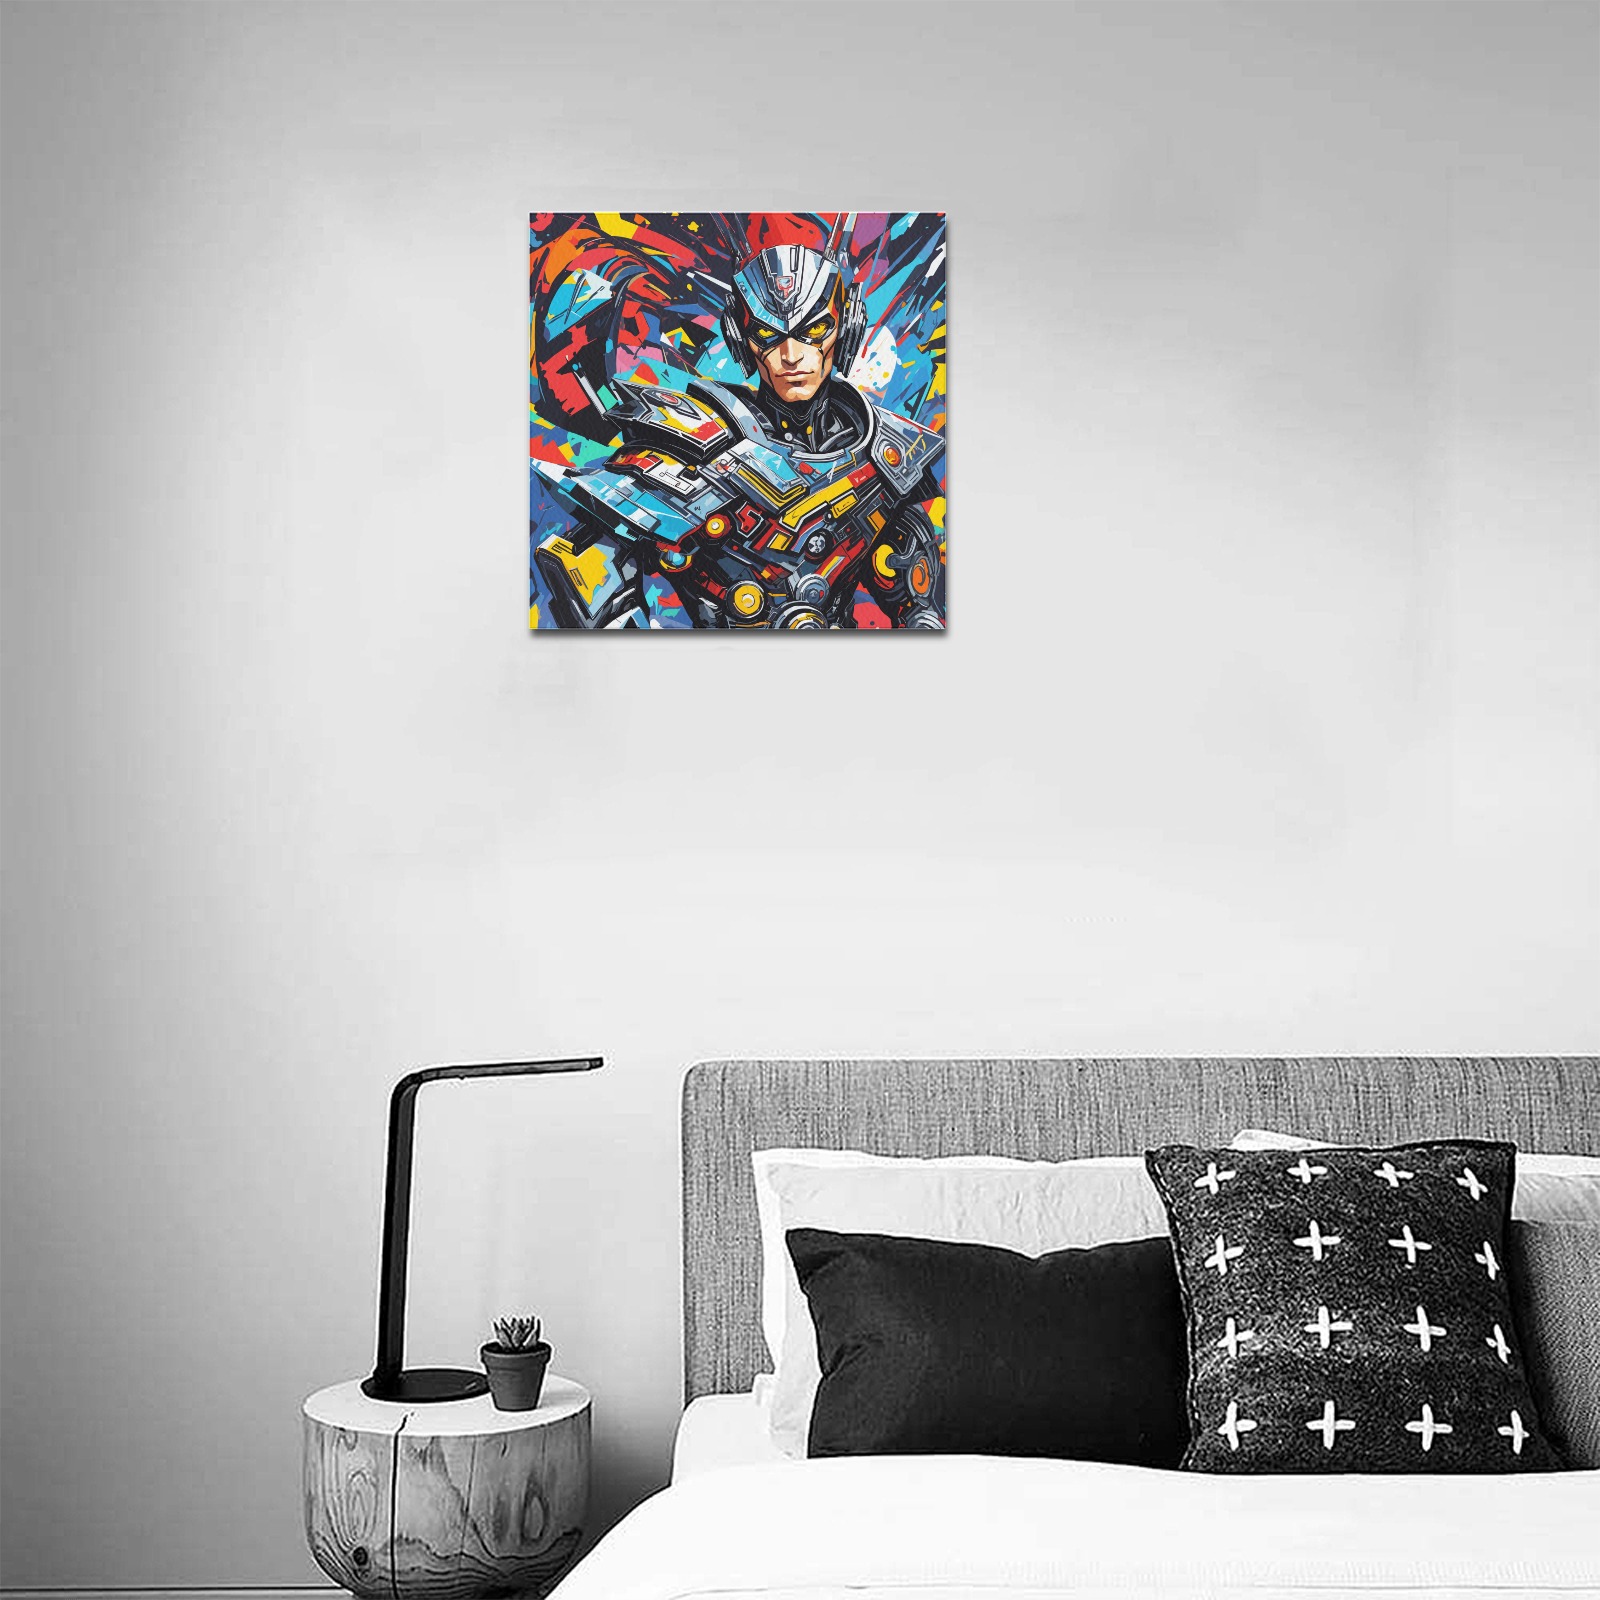 Awesome cyborg hero stunning modern abstract art. Upgraded Canvas Print 16"x16"